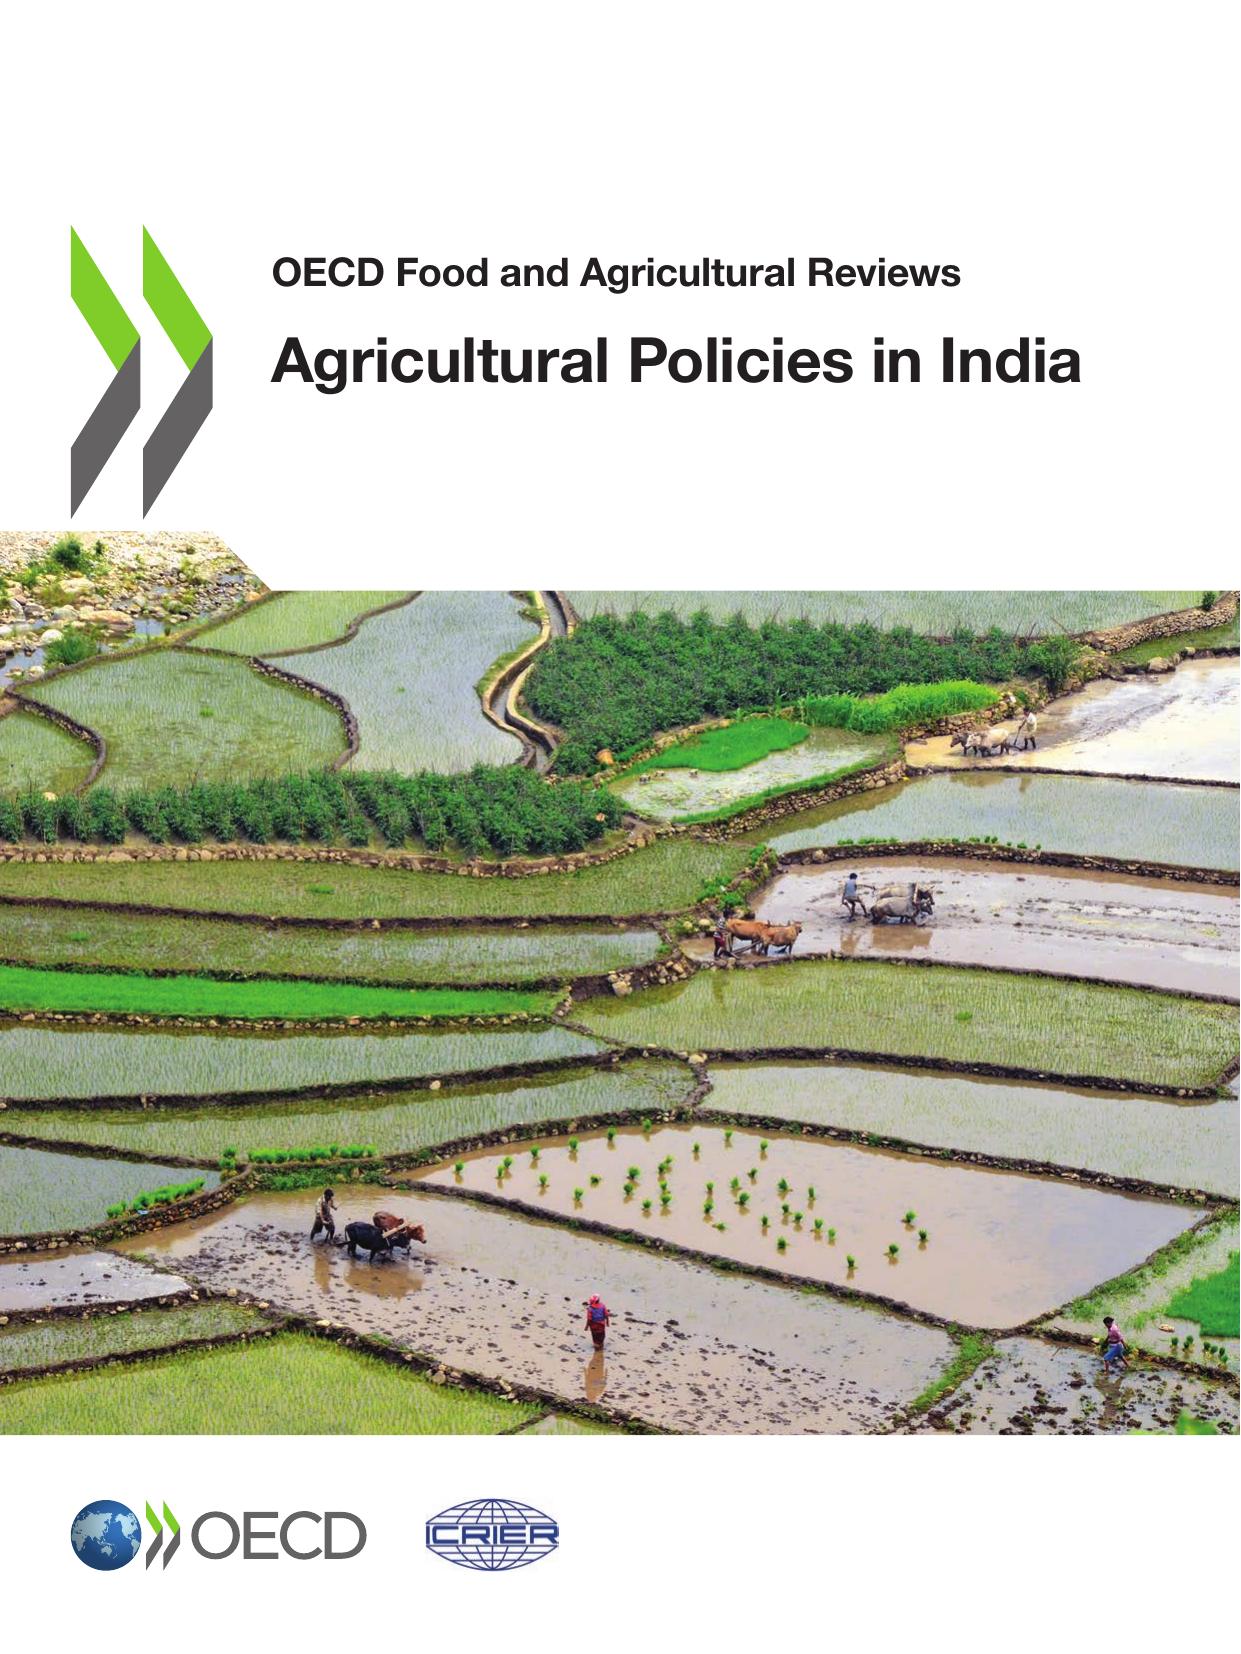 Agricultural Policies in India 2018